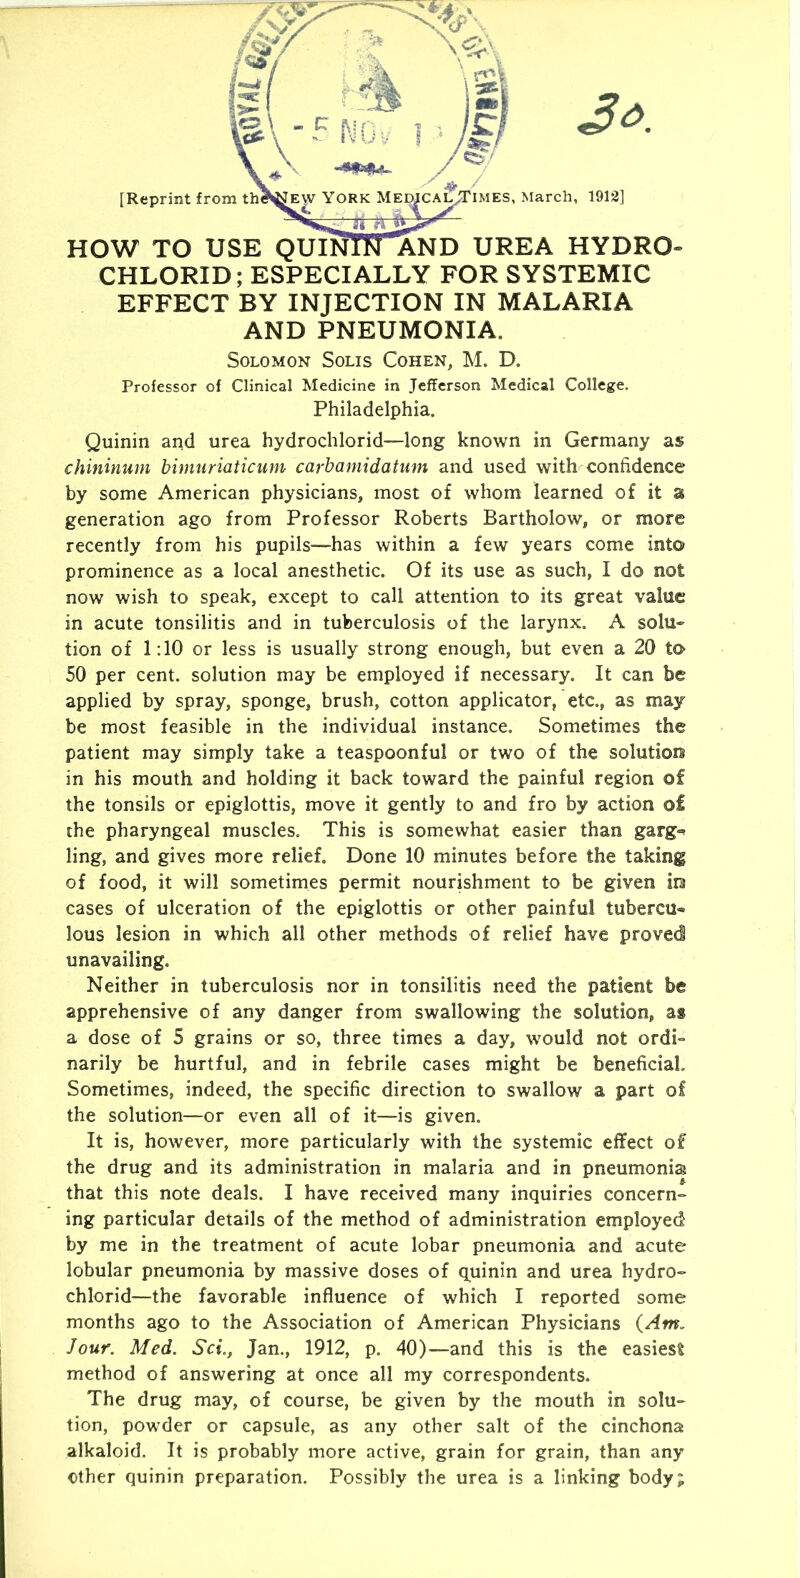 CHLORID; ESPECIALLY FOR SYSTEMIC EFFECT BY INJECTION IN MALARIA AND PNEUMONIA. Solomon Solis Cohen, M. D. Professor of Clinical Medicine in Jefferson Medical College. Philadelphia. Quinin and urea hydrochlorid—long known in Germany as chininum bimuriaticum carbamidatum and used with confidence by some American physicians, most of whom learned of it a generation ago from Professor Roberts Bartholow, or more recently from his pupils~has within a few years come into prominence as a local anesthetic. Of its use as such, I do not now wish to speak, except to call attention to its great value in acute tonsilitis and in tuberculosis of the larynx. A solu» tion of 1:10 or less is usually strong enough, but even a 20 to 50 per cent, solution may be employed if necessary. It can be applied by spray, sponge, brush, cotton applicator, etc., as may be most feasible in the individual instance. Sometimes the patient may simply take a teaspoonful or two of the solution in his mouth and holding it back toward the painful region of the tonsils or epiglottis, move it gently to and fro by action of the pharyngeal muscles. This is somewhat easier than garg»» ling, and gives more relief. Done 10 minutes before the taking of food, it will sometimes permit nourishment to be given in cases of ulceration of the epiglottis or other painful tubercu- lous lesion in which all other methods of relief have proved! unavailing. Neither in tuberculosis nor in tonsilitis need the patient be apprehensive of any danger from swallowing the solution, as a dose of 5 grains or so, three times a day, would not ordi- narily be hurtful, and in febrile cases might be beneficial. Sometimes, indeed, the specific direction to swallow a part of the solution—or even all of it—is given. It is, however, more particularly with the systemic effect of the drug and its administration in malaria and in pneumonia that this note deals. I have received many inquiries concern- ing particular details of the method of administration employed by me in the treatment of acute lobar pneumonia and acute lobular pneumonia by massive doses of q^uinin and urea hydro- chlorid—the favorable influence of which I reported some months ago to the Association of American Physicians {Am. Jour. Med. Set., Jan., 1912, p. 40)-—and this is the easiest method of answering at once all my correspondents. The drug may, of course, be given by the mouth in solu- tion, powder or capsule, as any other salt of the cinchona alkaloid. It is probably more active, grain for grain, than any other quinin preparation. Possibly the urea is a linking body;